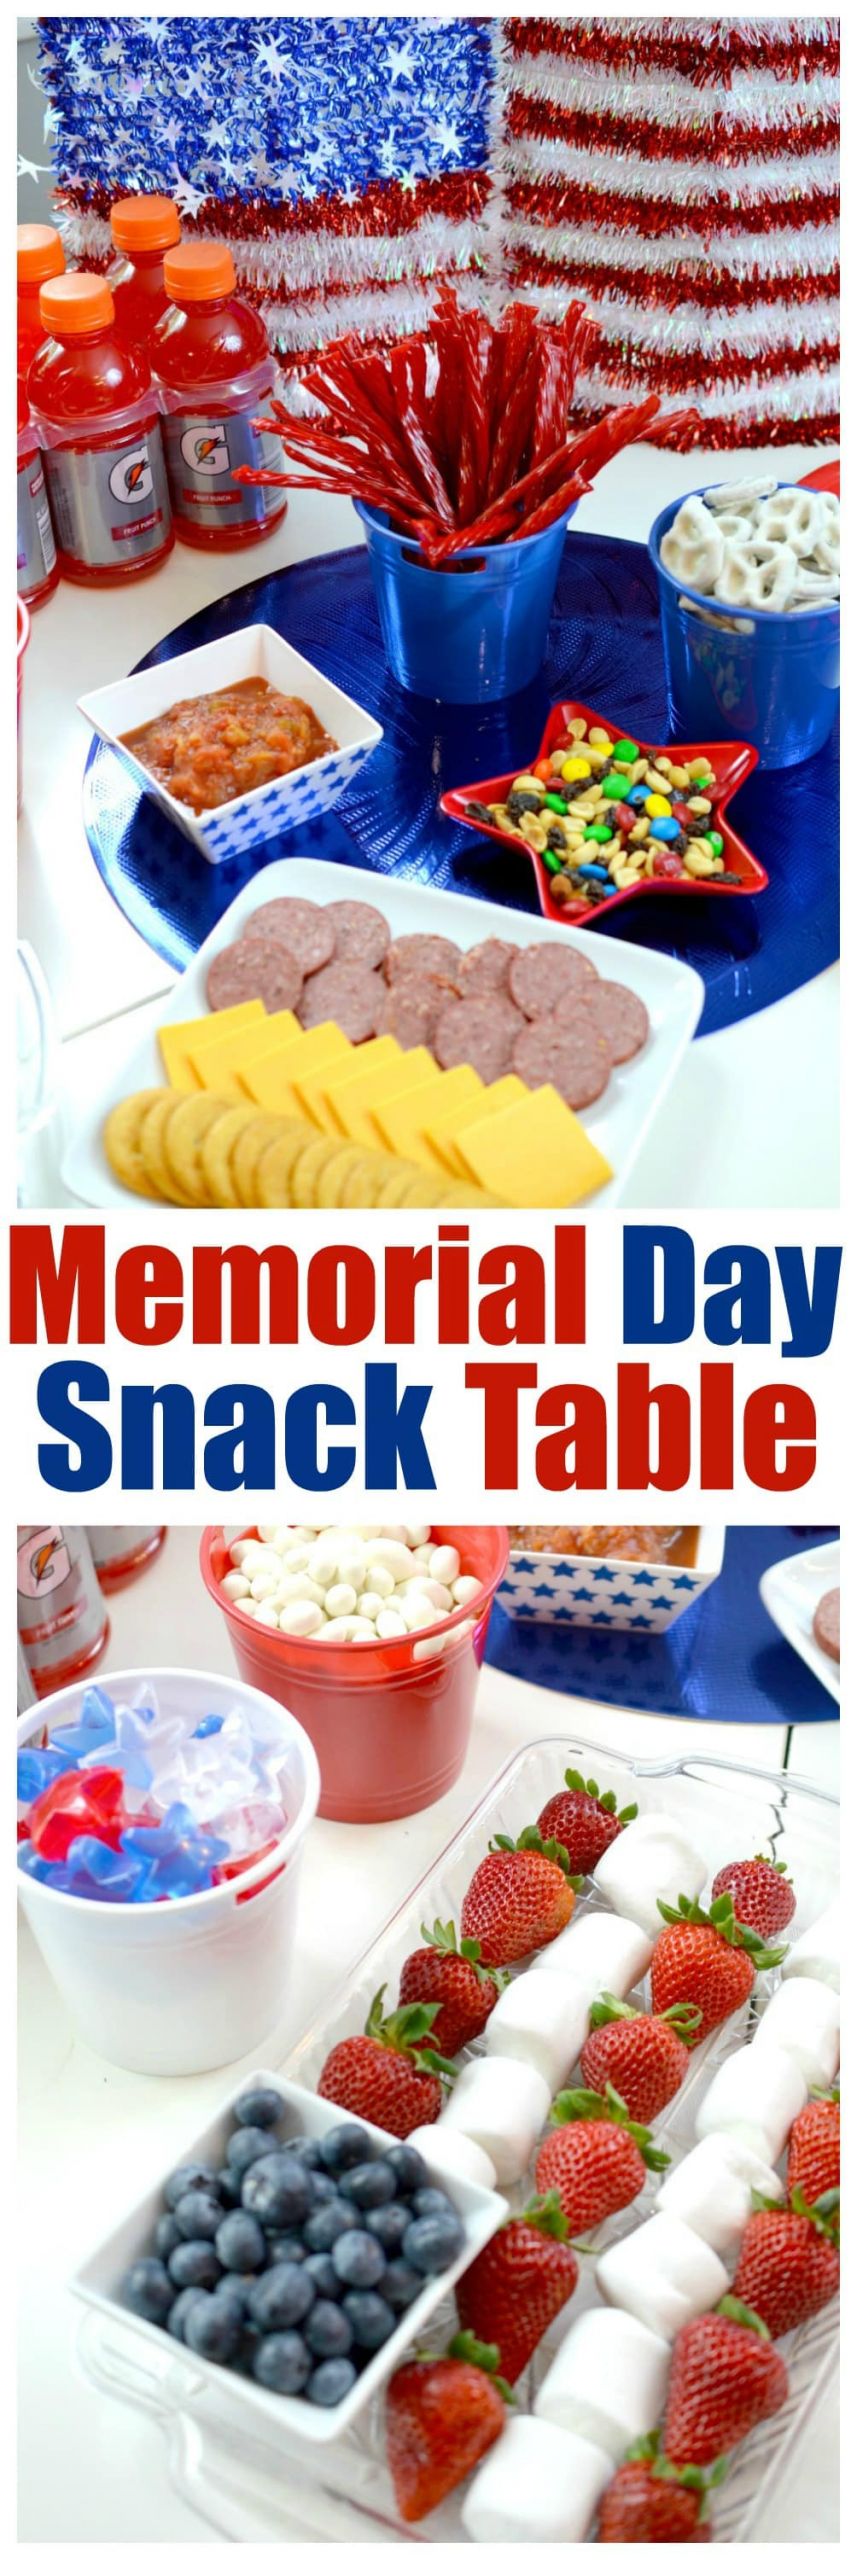 Memorial Day Party Food Ideas
 Memorial Day Party Ideas How to Create a Memorial Day